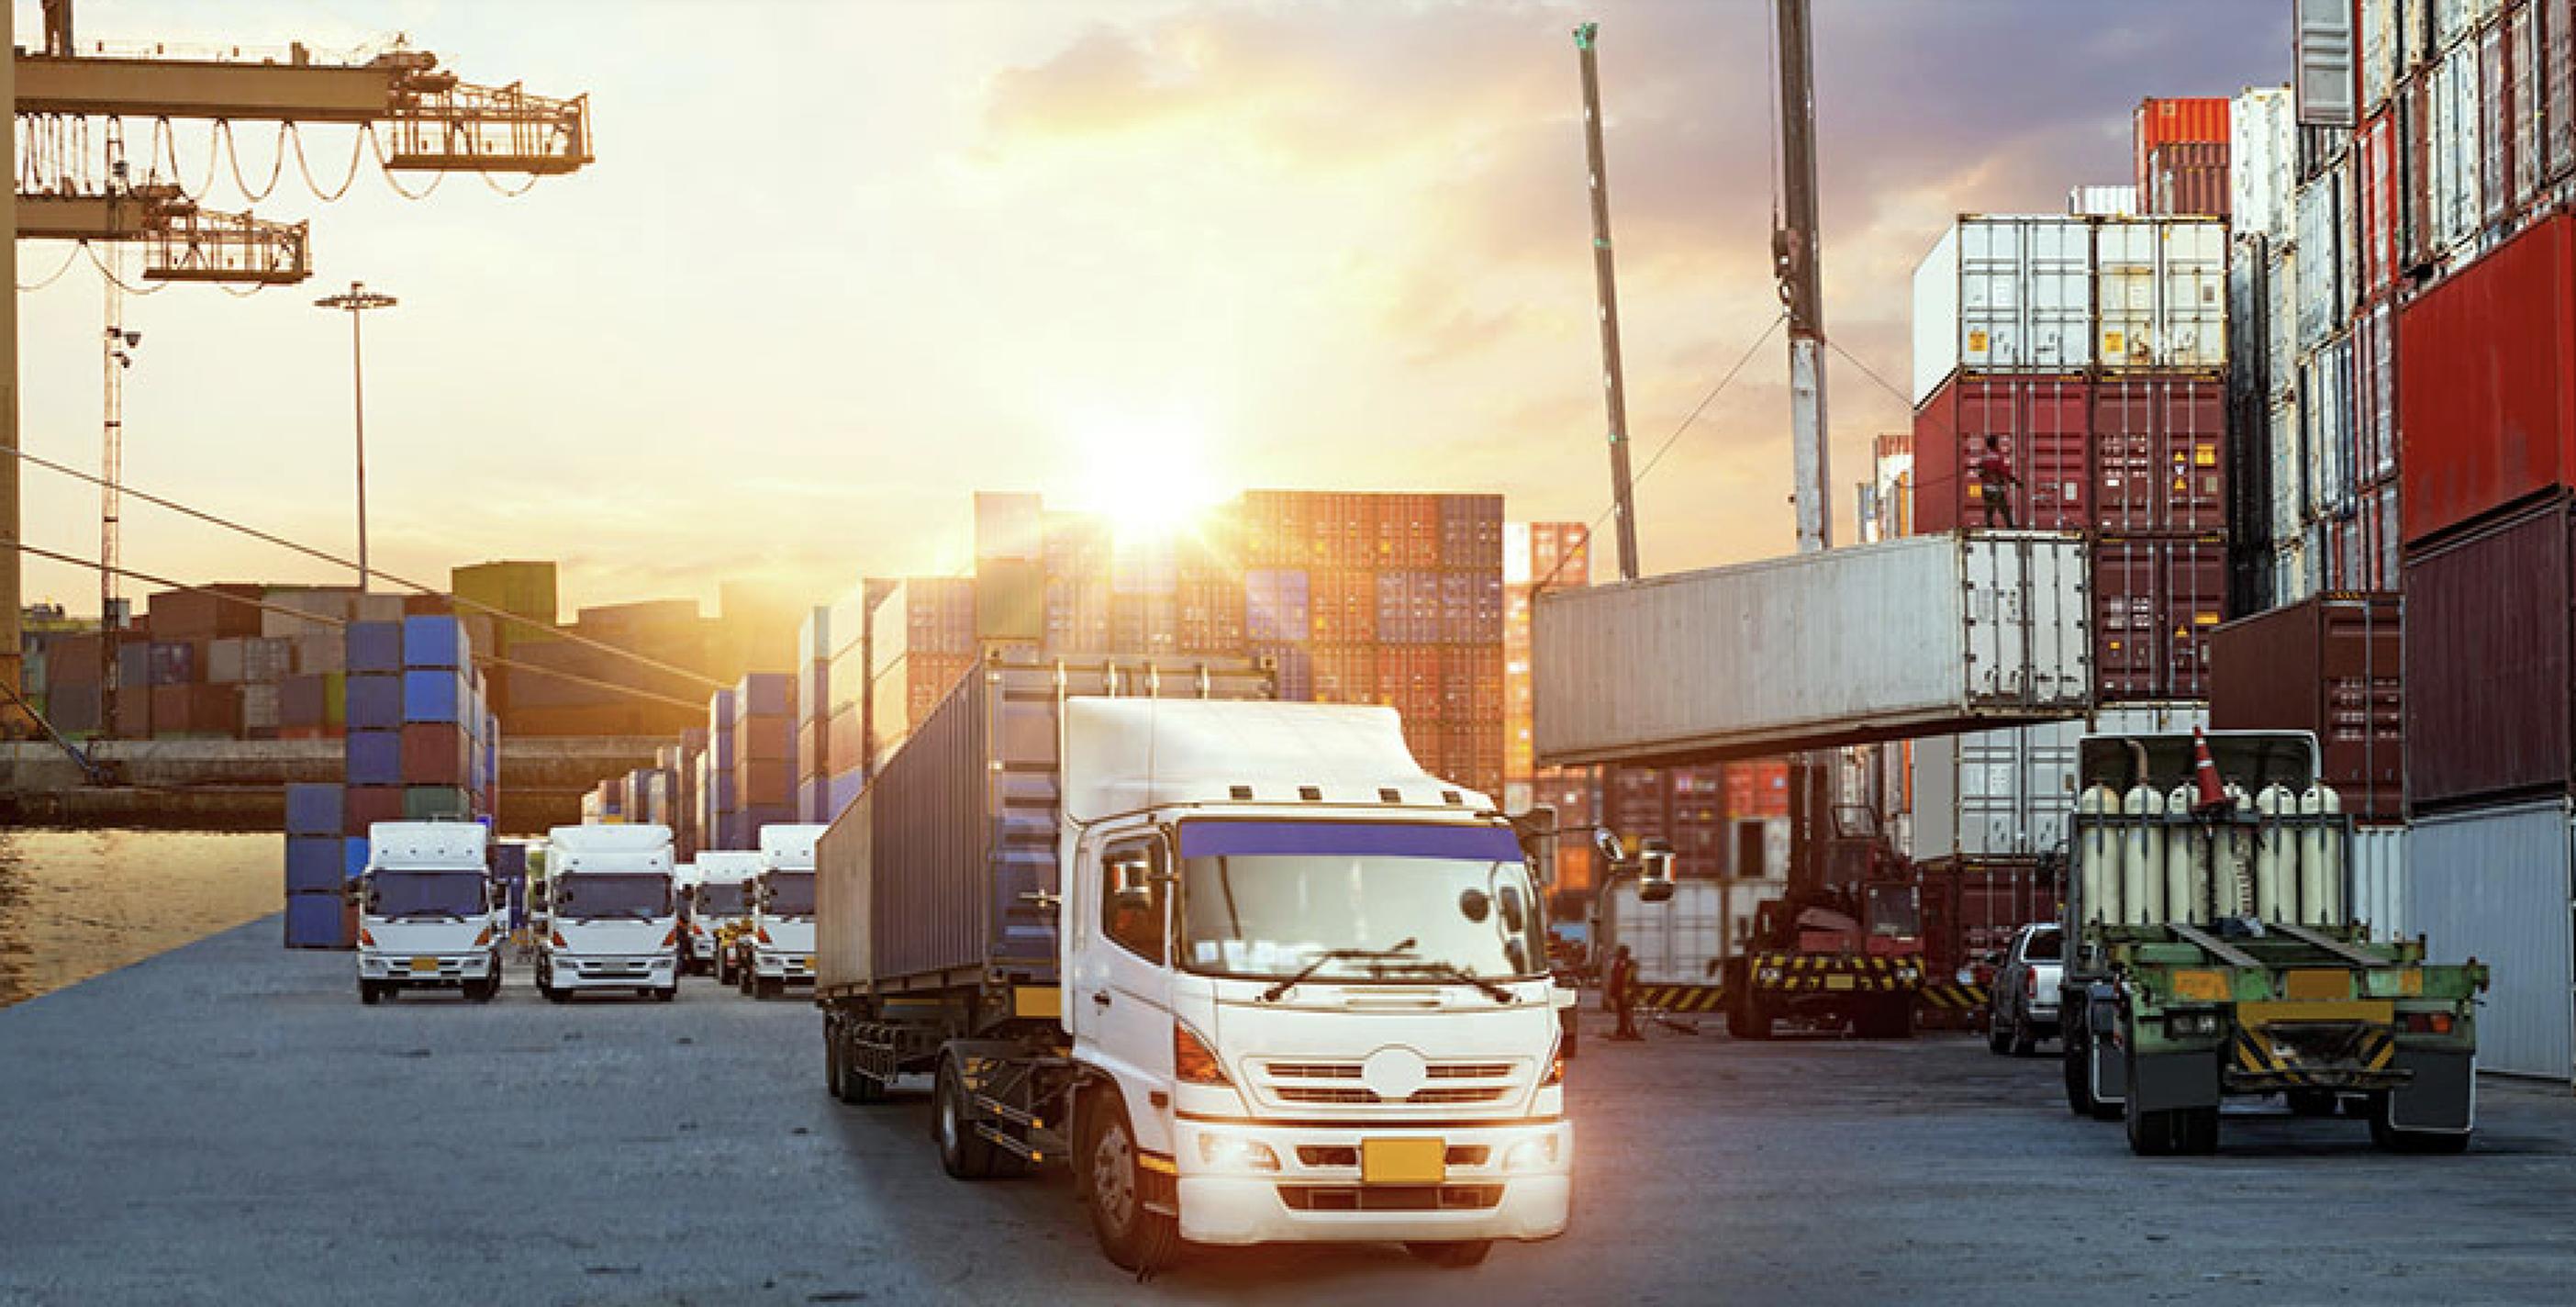 The Future of Freight is among the themes that TRIG is keen to support